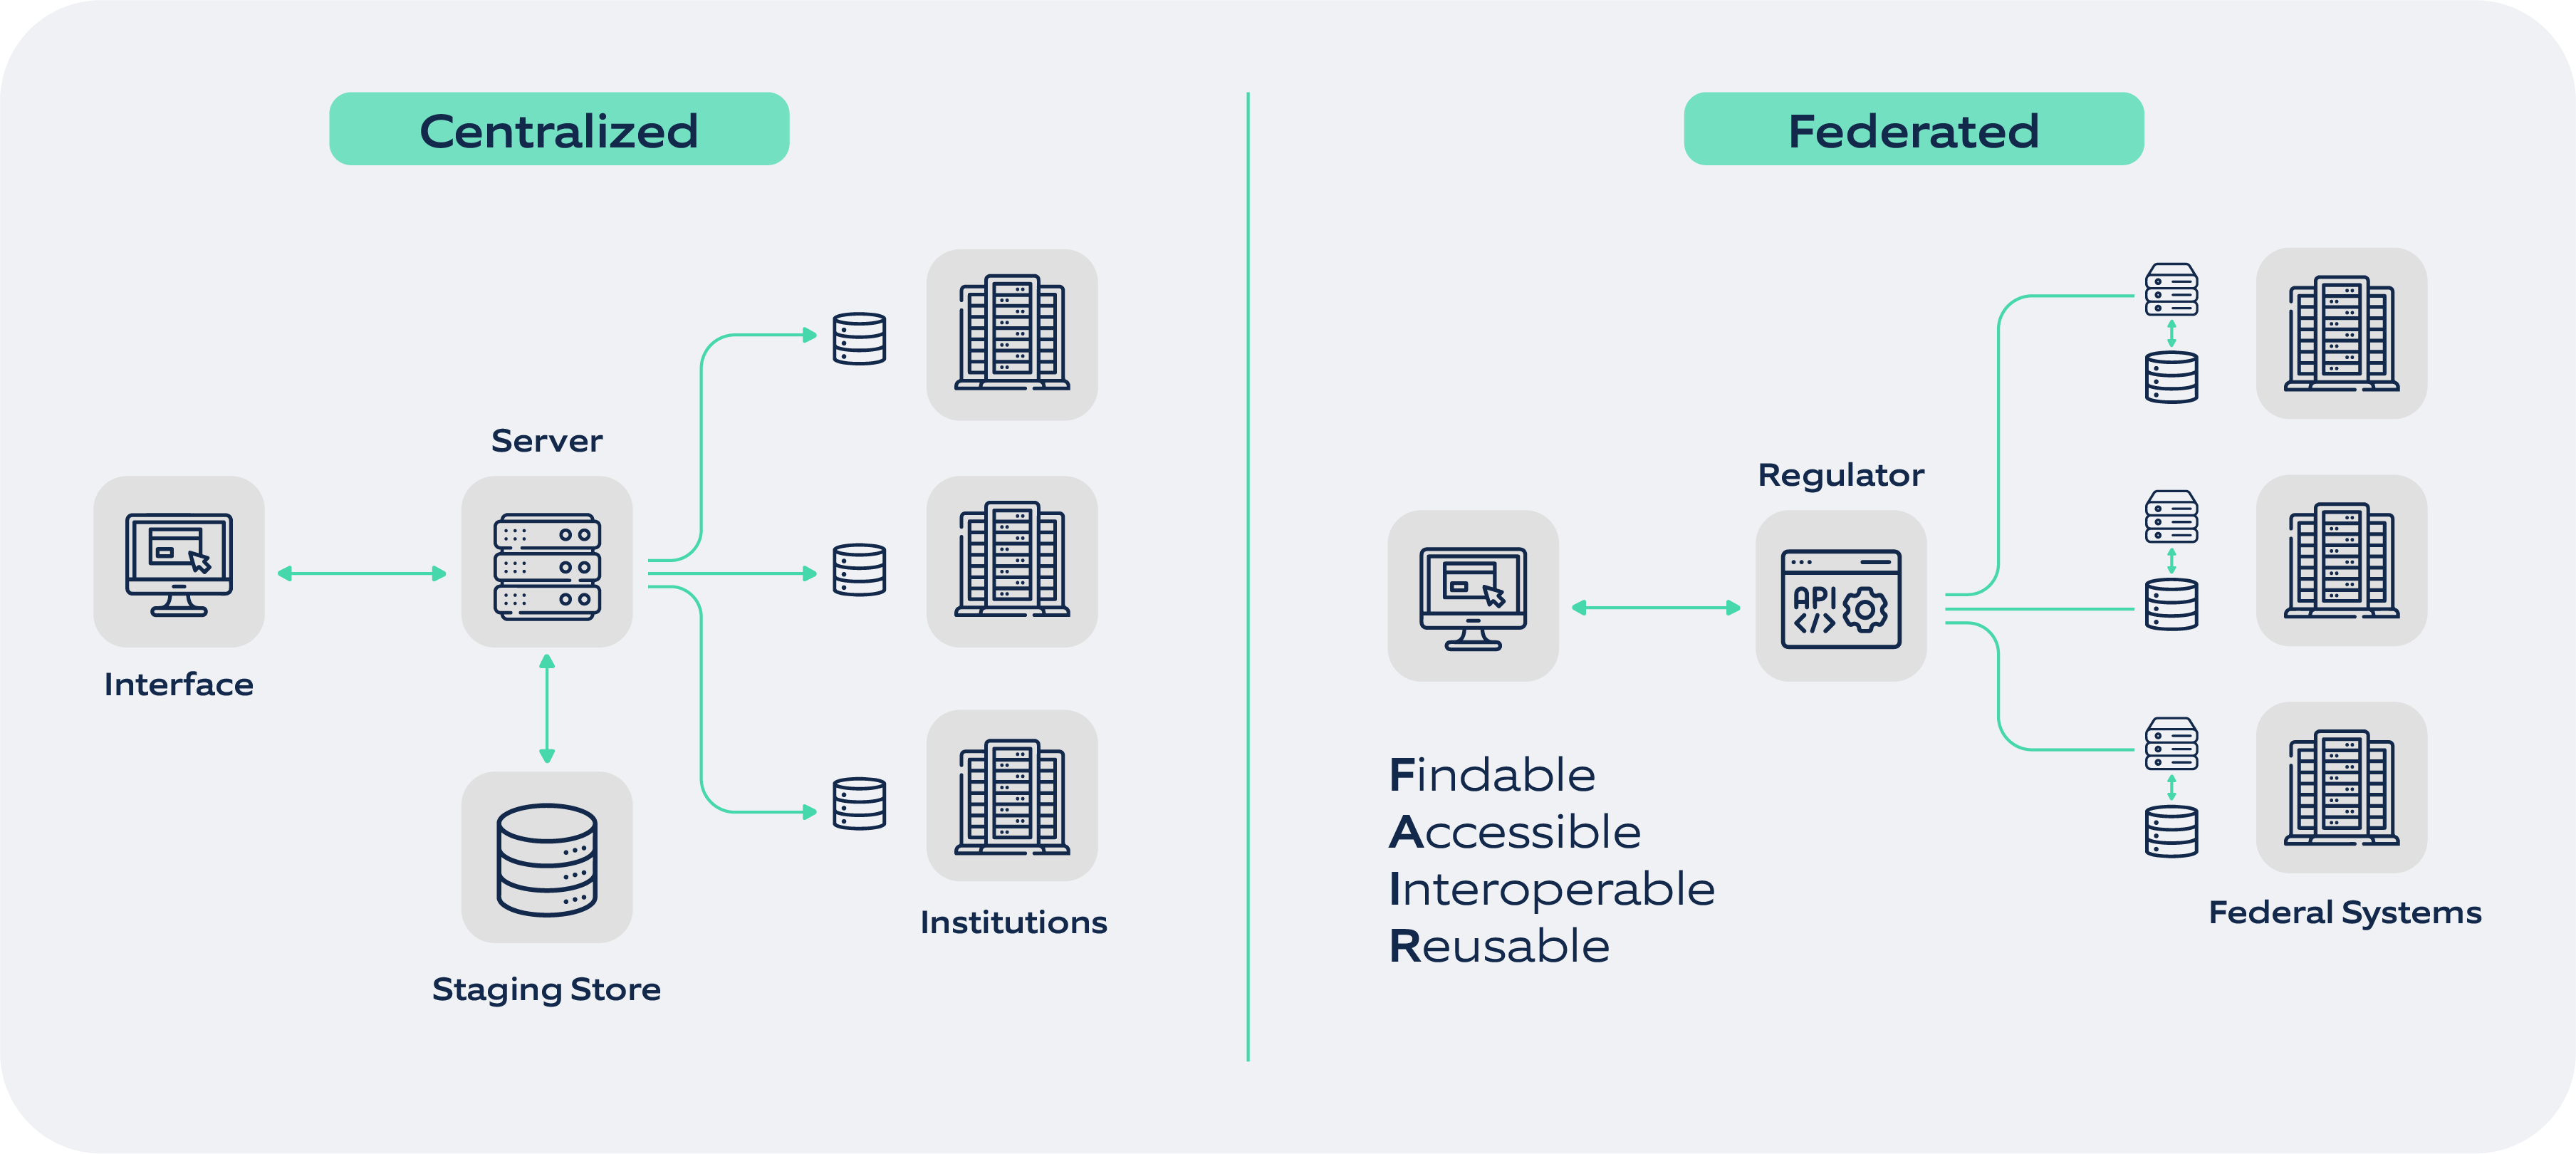 comparison and evaluation of centralized versus federated architecture style or a model